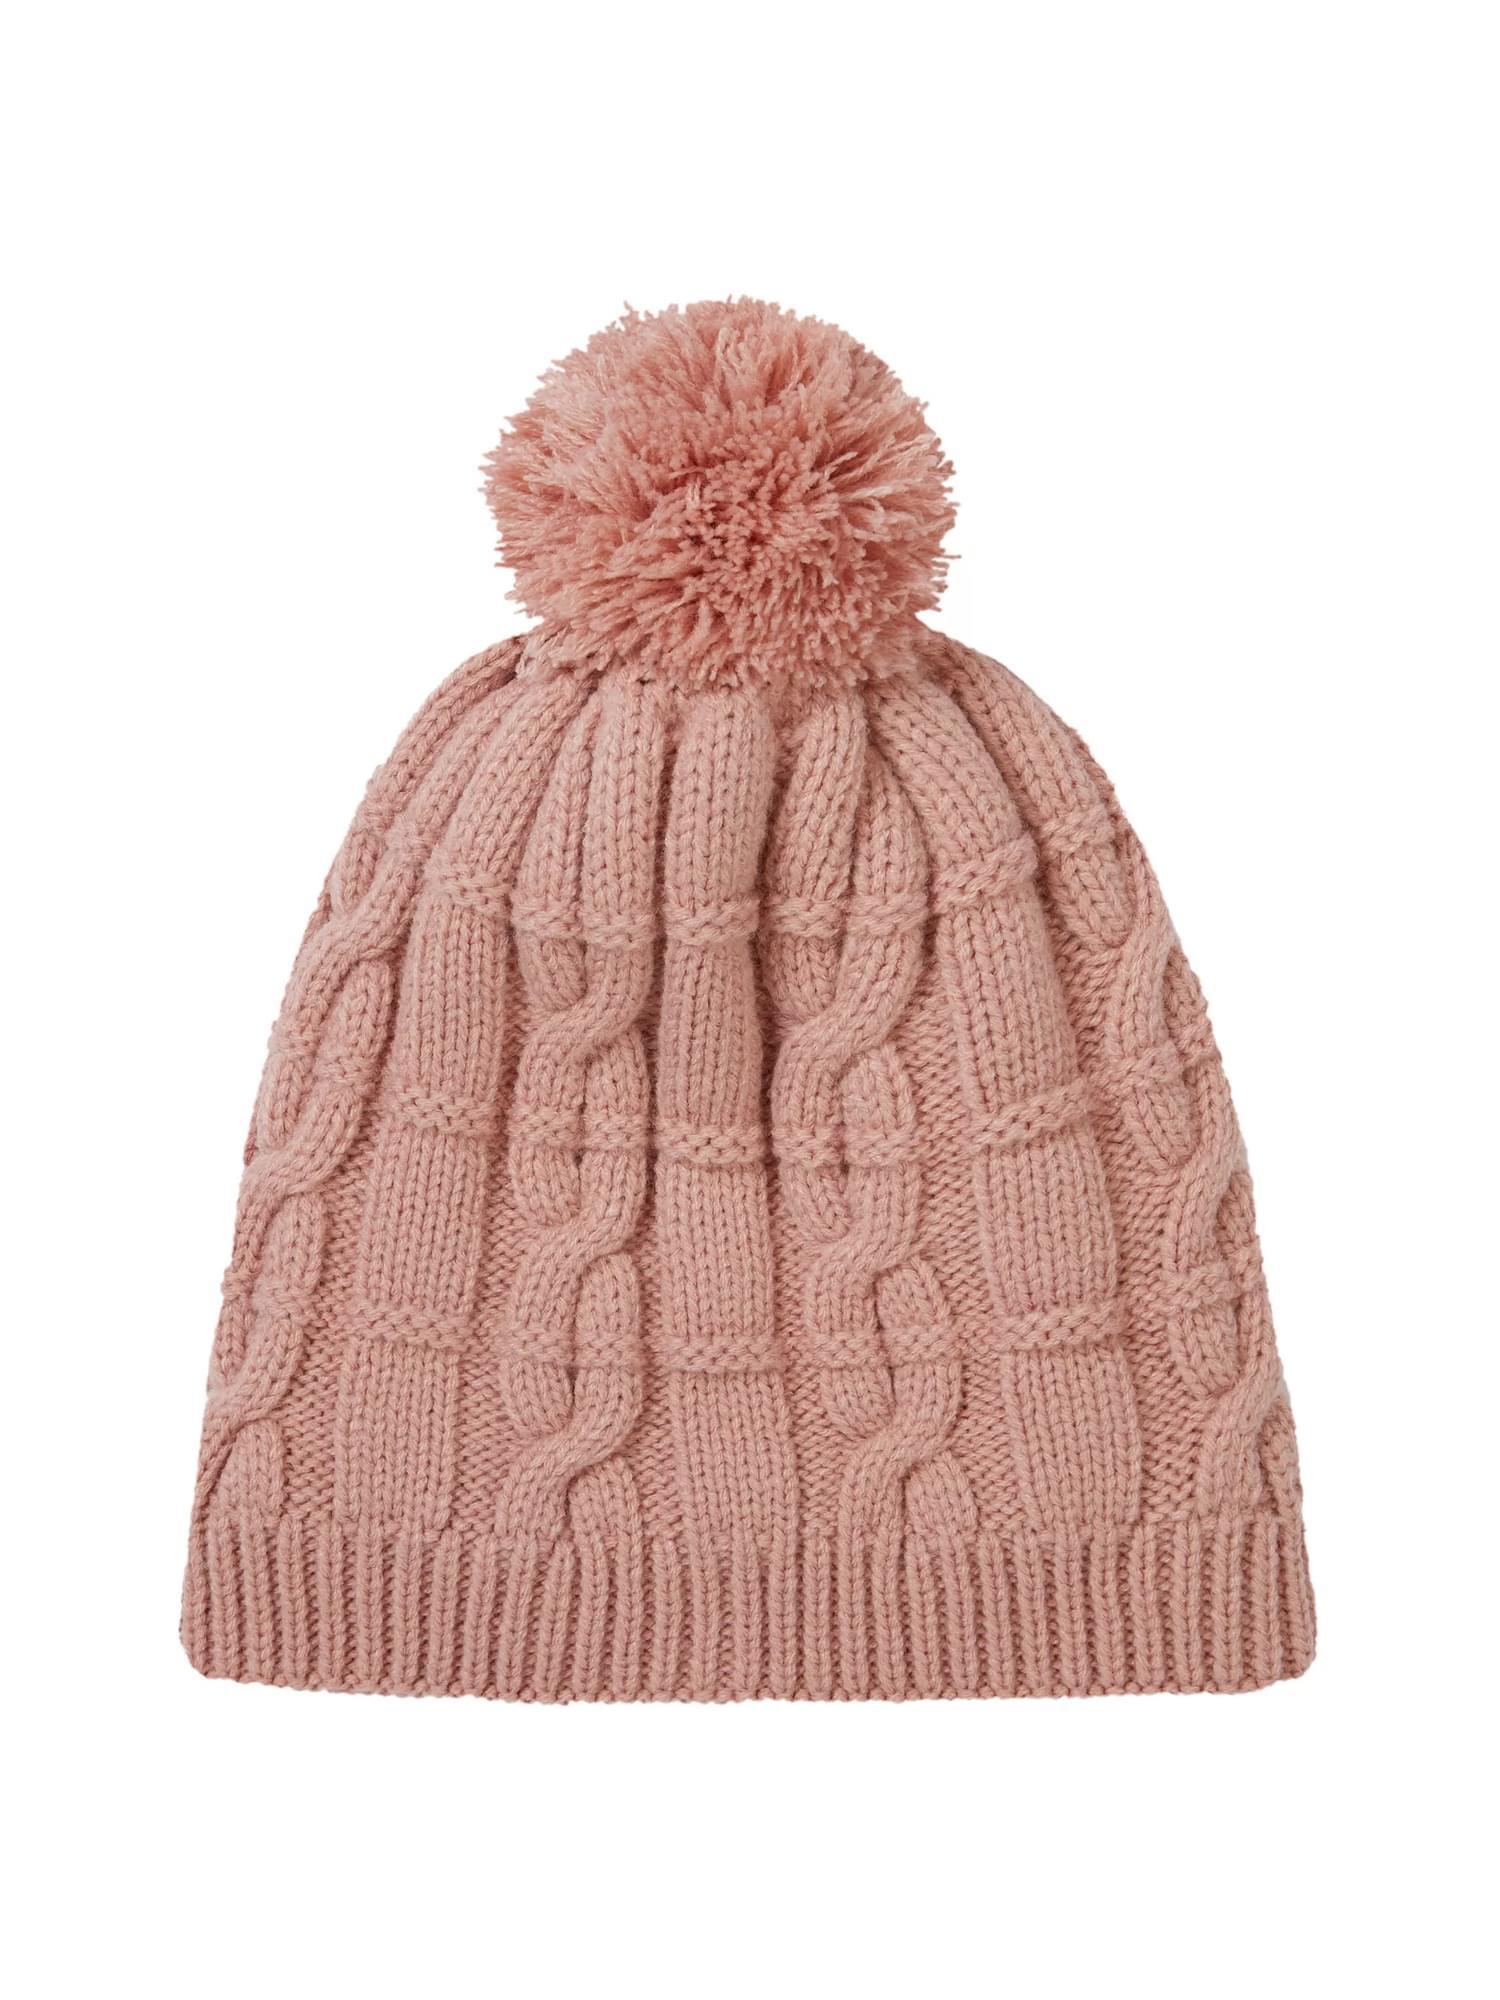 Waterproof Cold Weather Cable Knit Bobble Hat 2/3